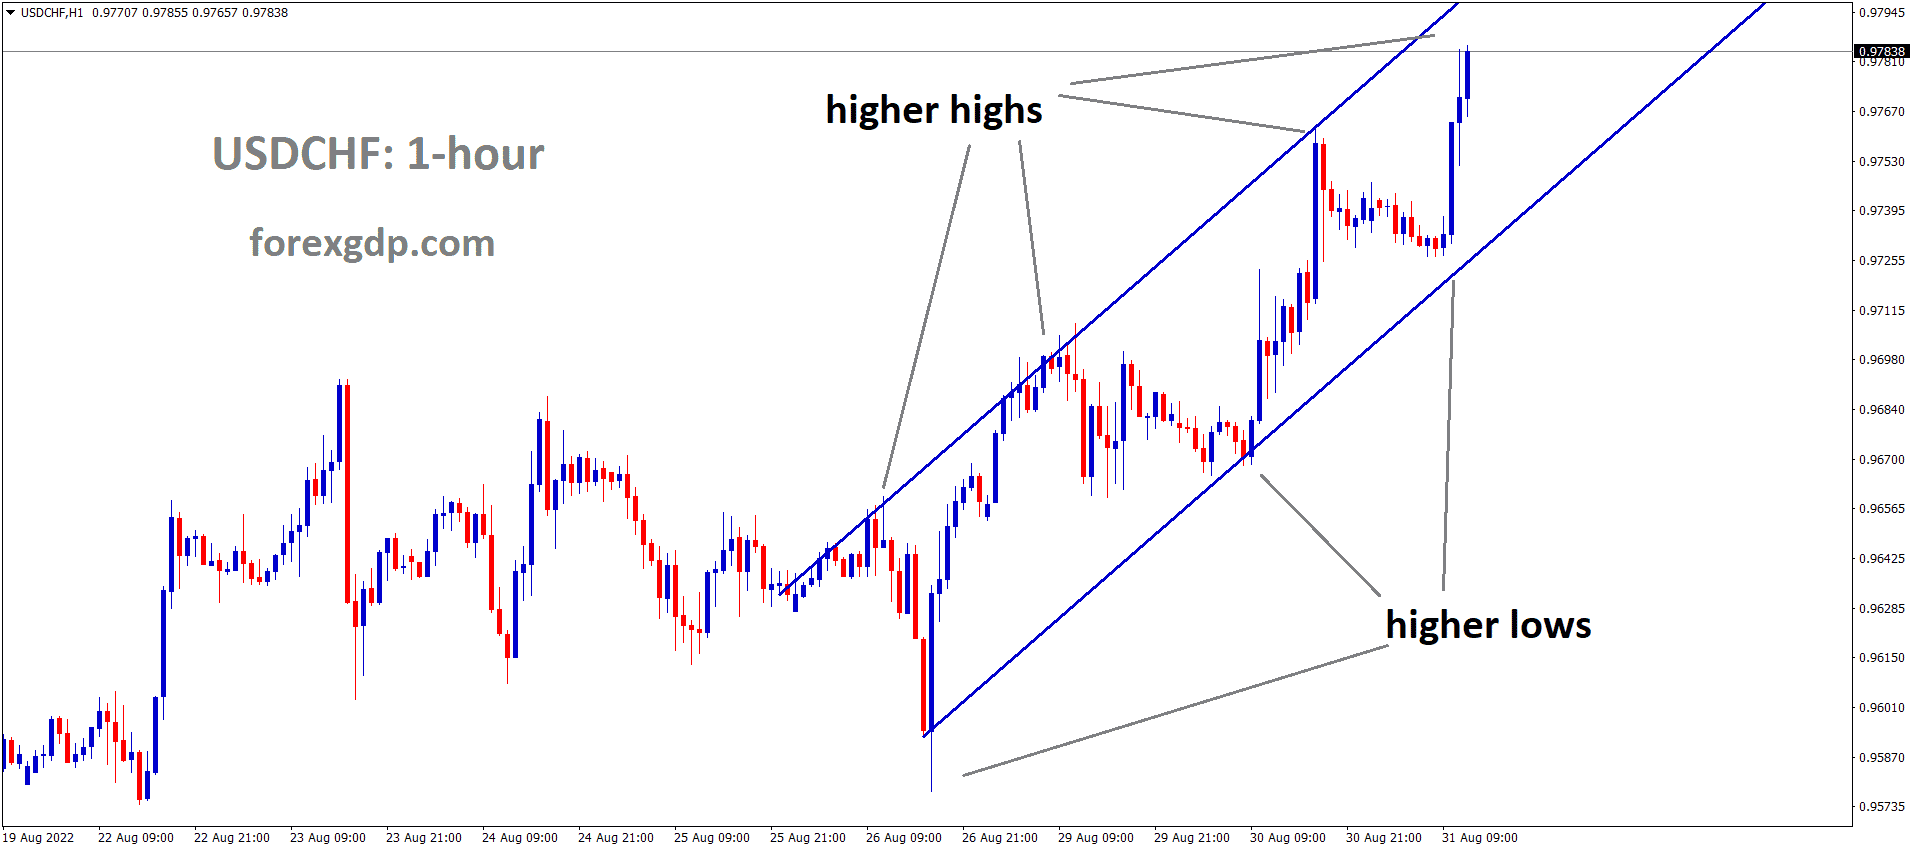 USDCHF is moving in an Ascending channel and the market has rebounded from the higher low area of the channel 2